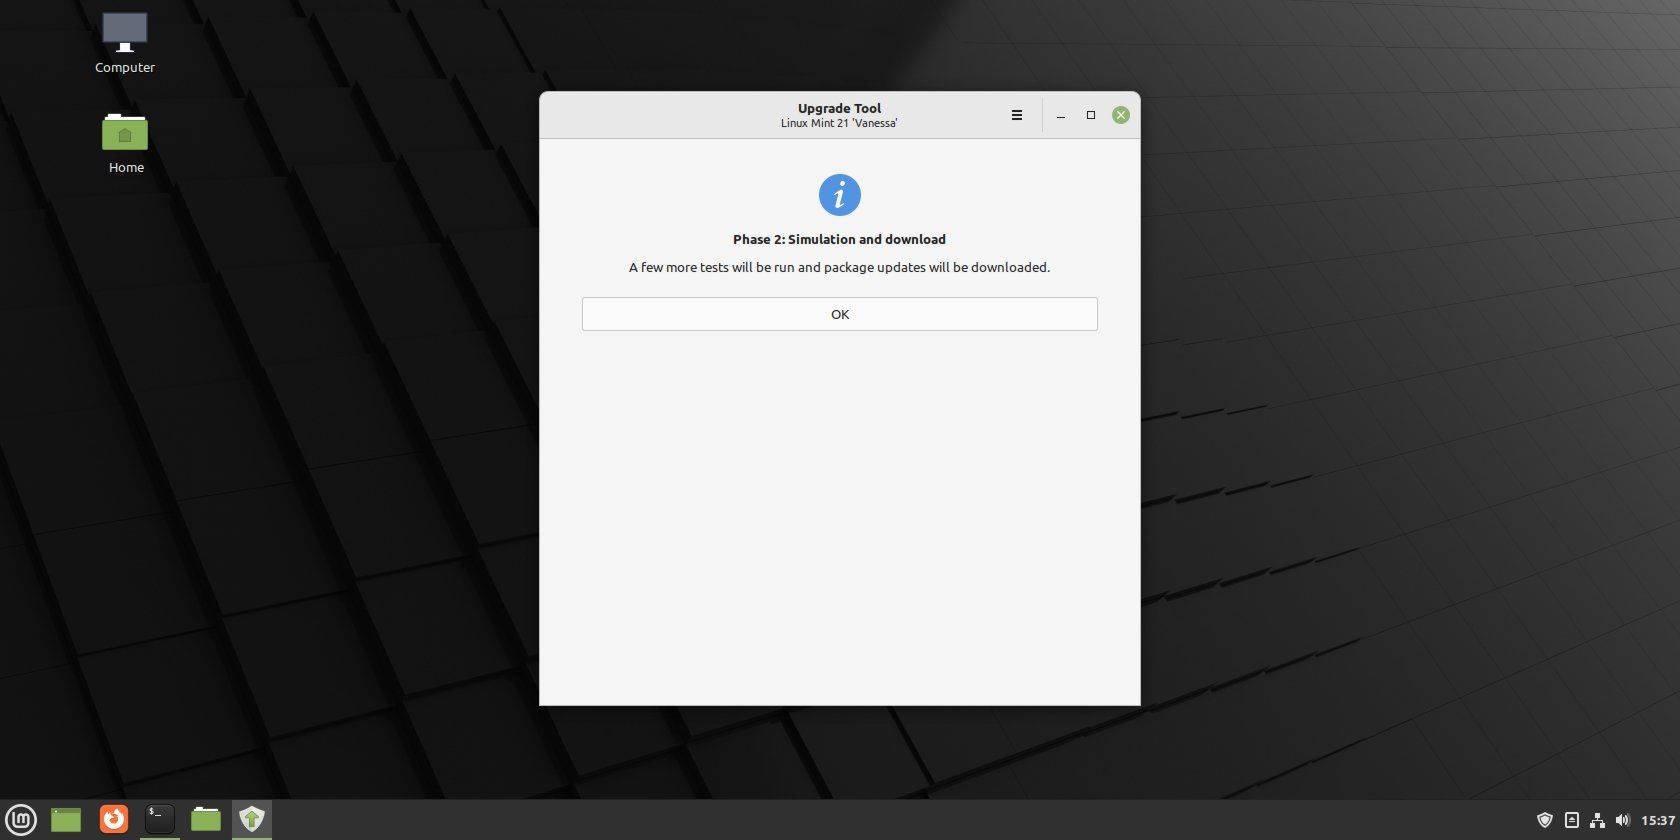 The Linux Mint Upgrade Tool Phase 2: Simulation and Download screen.